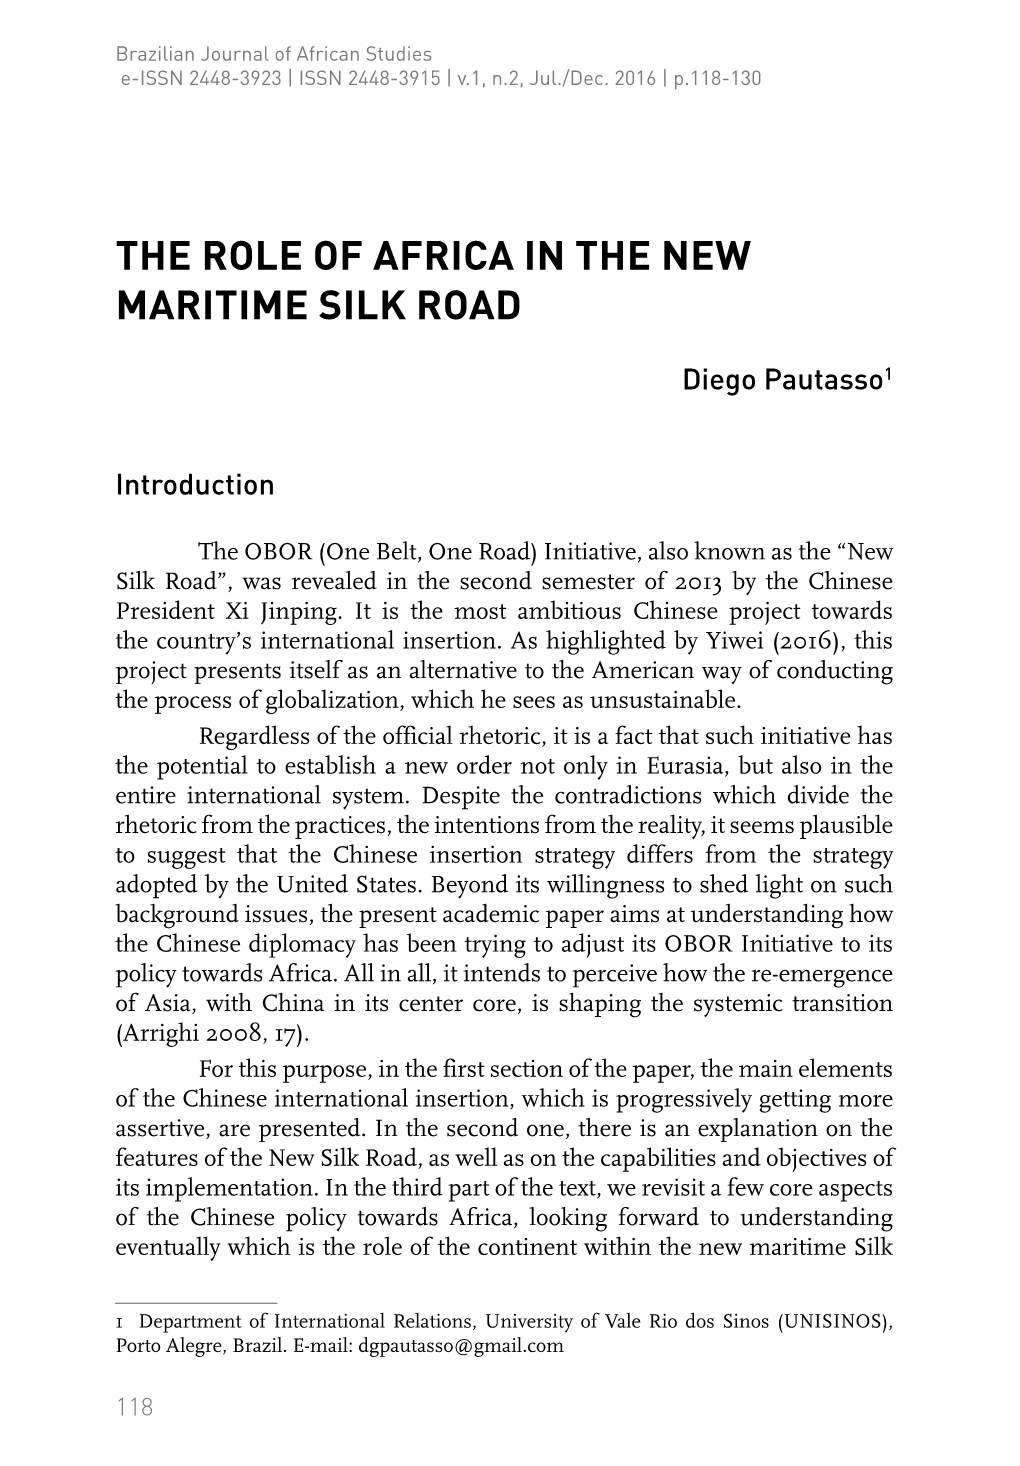 The Role of Africa in the New Maritime Silk Road